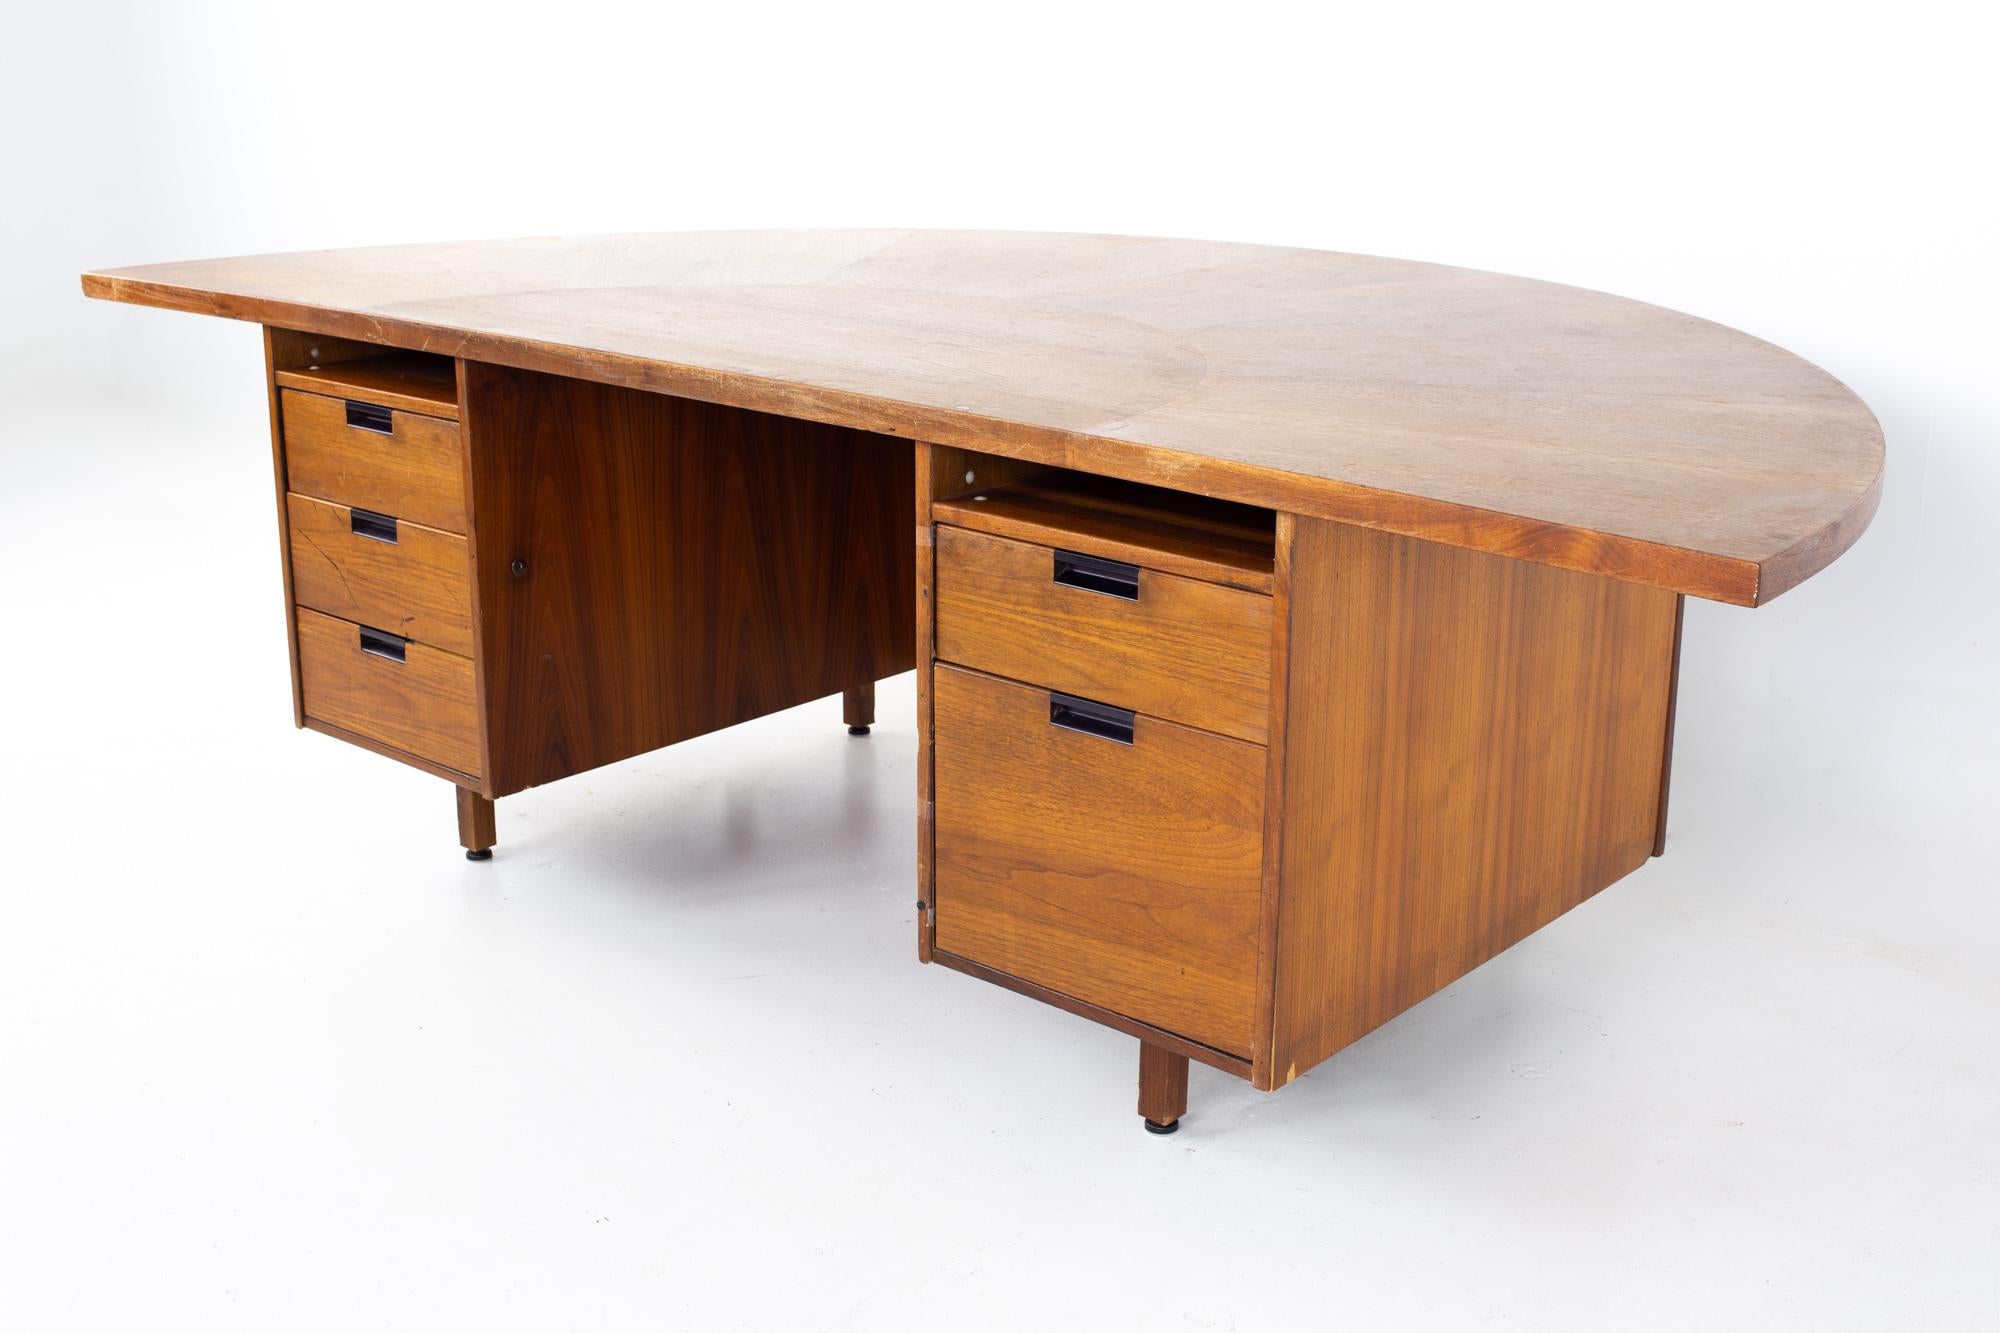 Jens Risom mid century half round executive desk.
Desk measures: 96 wide x 48 deep x 29.5 inches high

All pieces of furniture can be had in what we call restored vintage condition. That means the piece is restored upon purchase so it’s free of